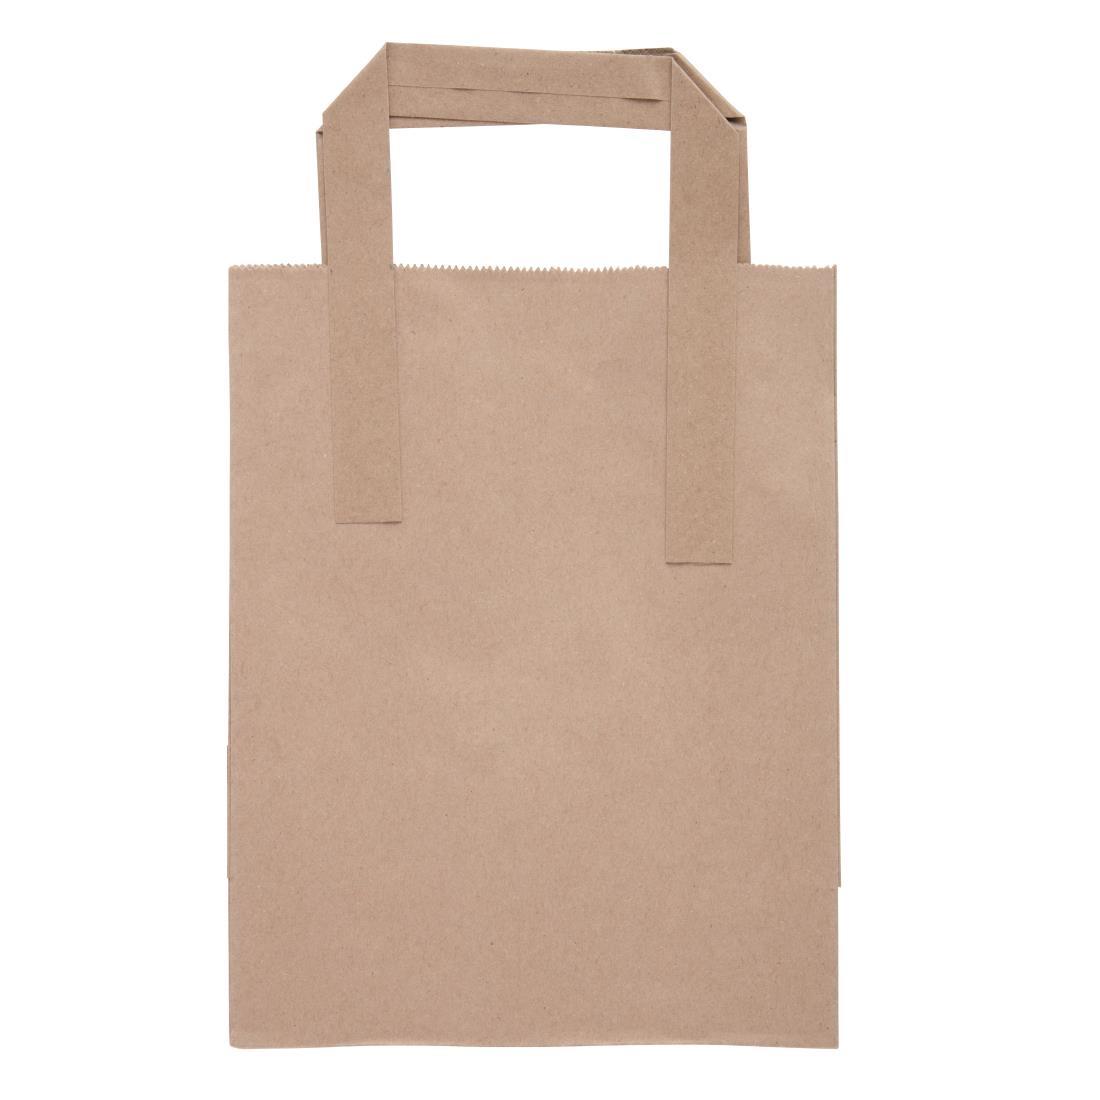 Fiesta Compostable Recycled Brown Paper Carrier Bags Small (Pack of 250) - CS351  - 2